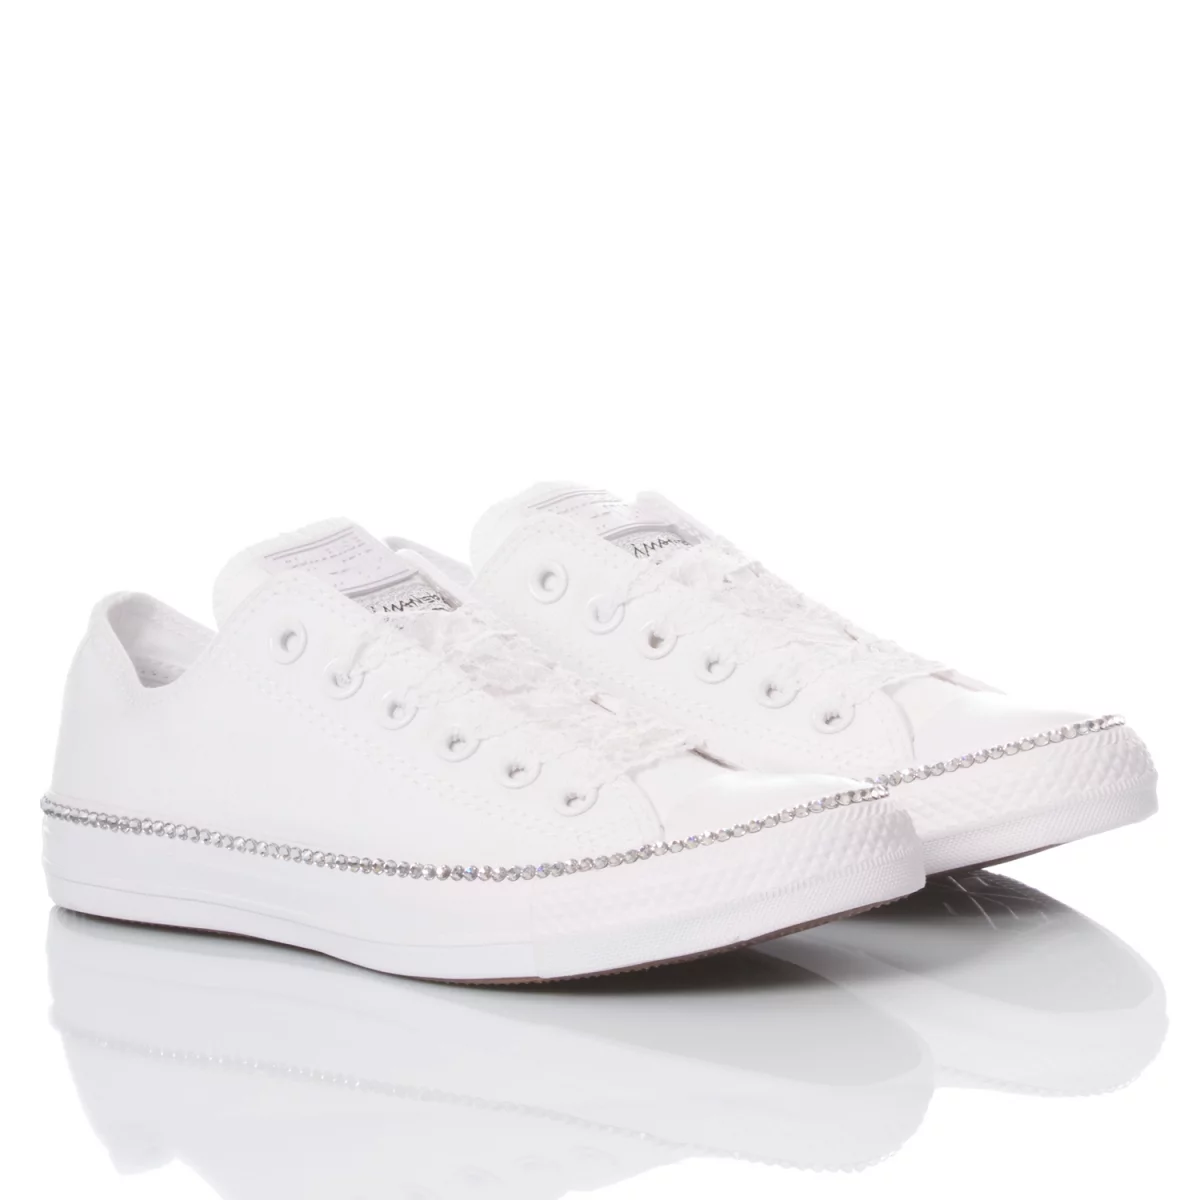 Converse Emily Ox Chuck Taylor Low Lace, Special, Swarovski